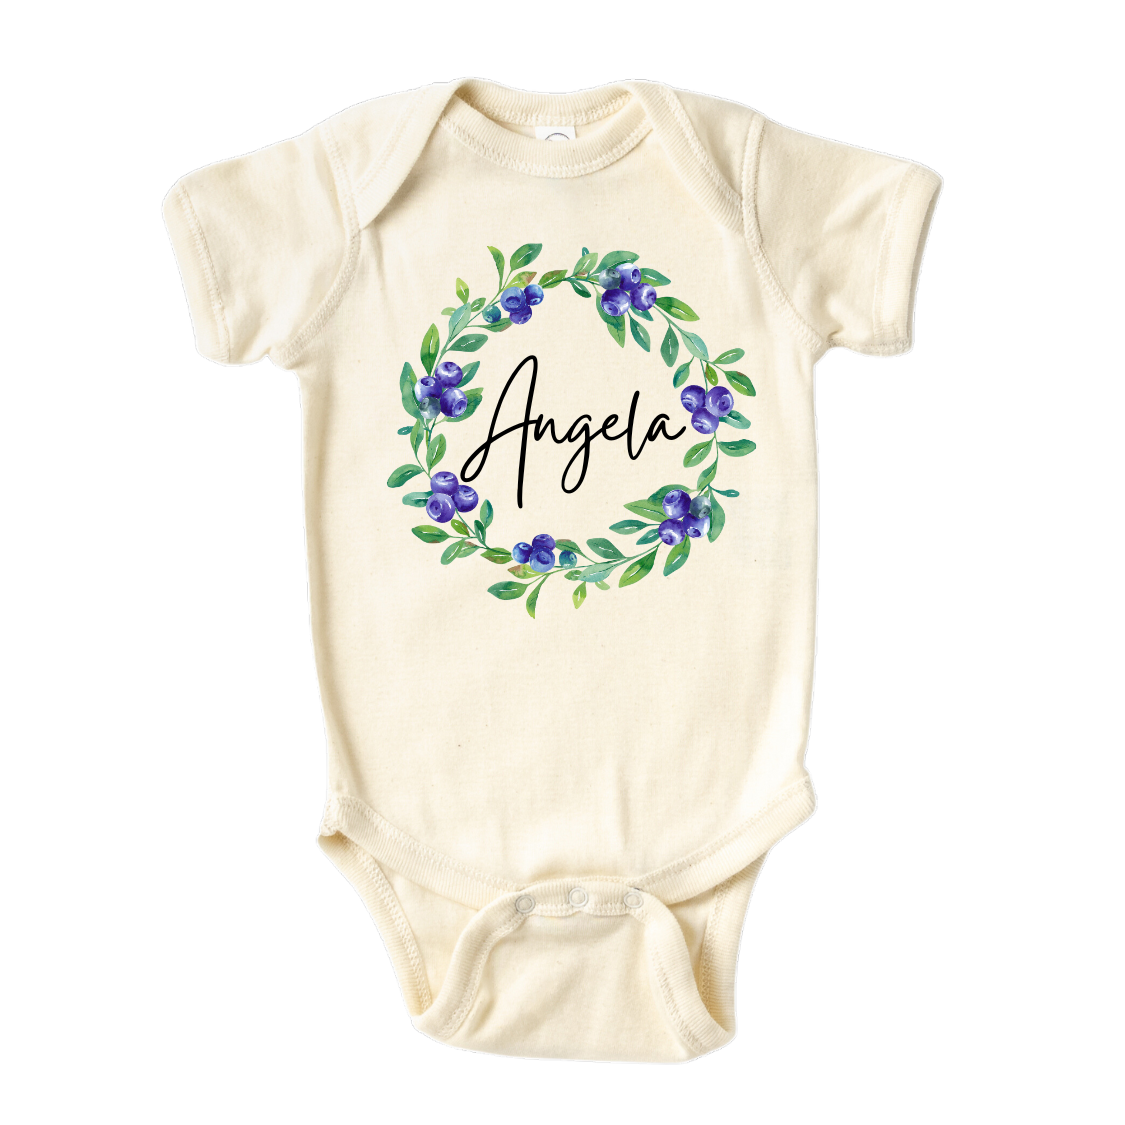 Baby Onesie - Baby Bodysuit - Natural Baby Clothes - Long Sleeve Baby Onsie with a cute blueberry floral wreath design, customizable with names.